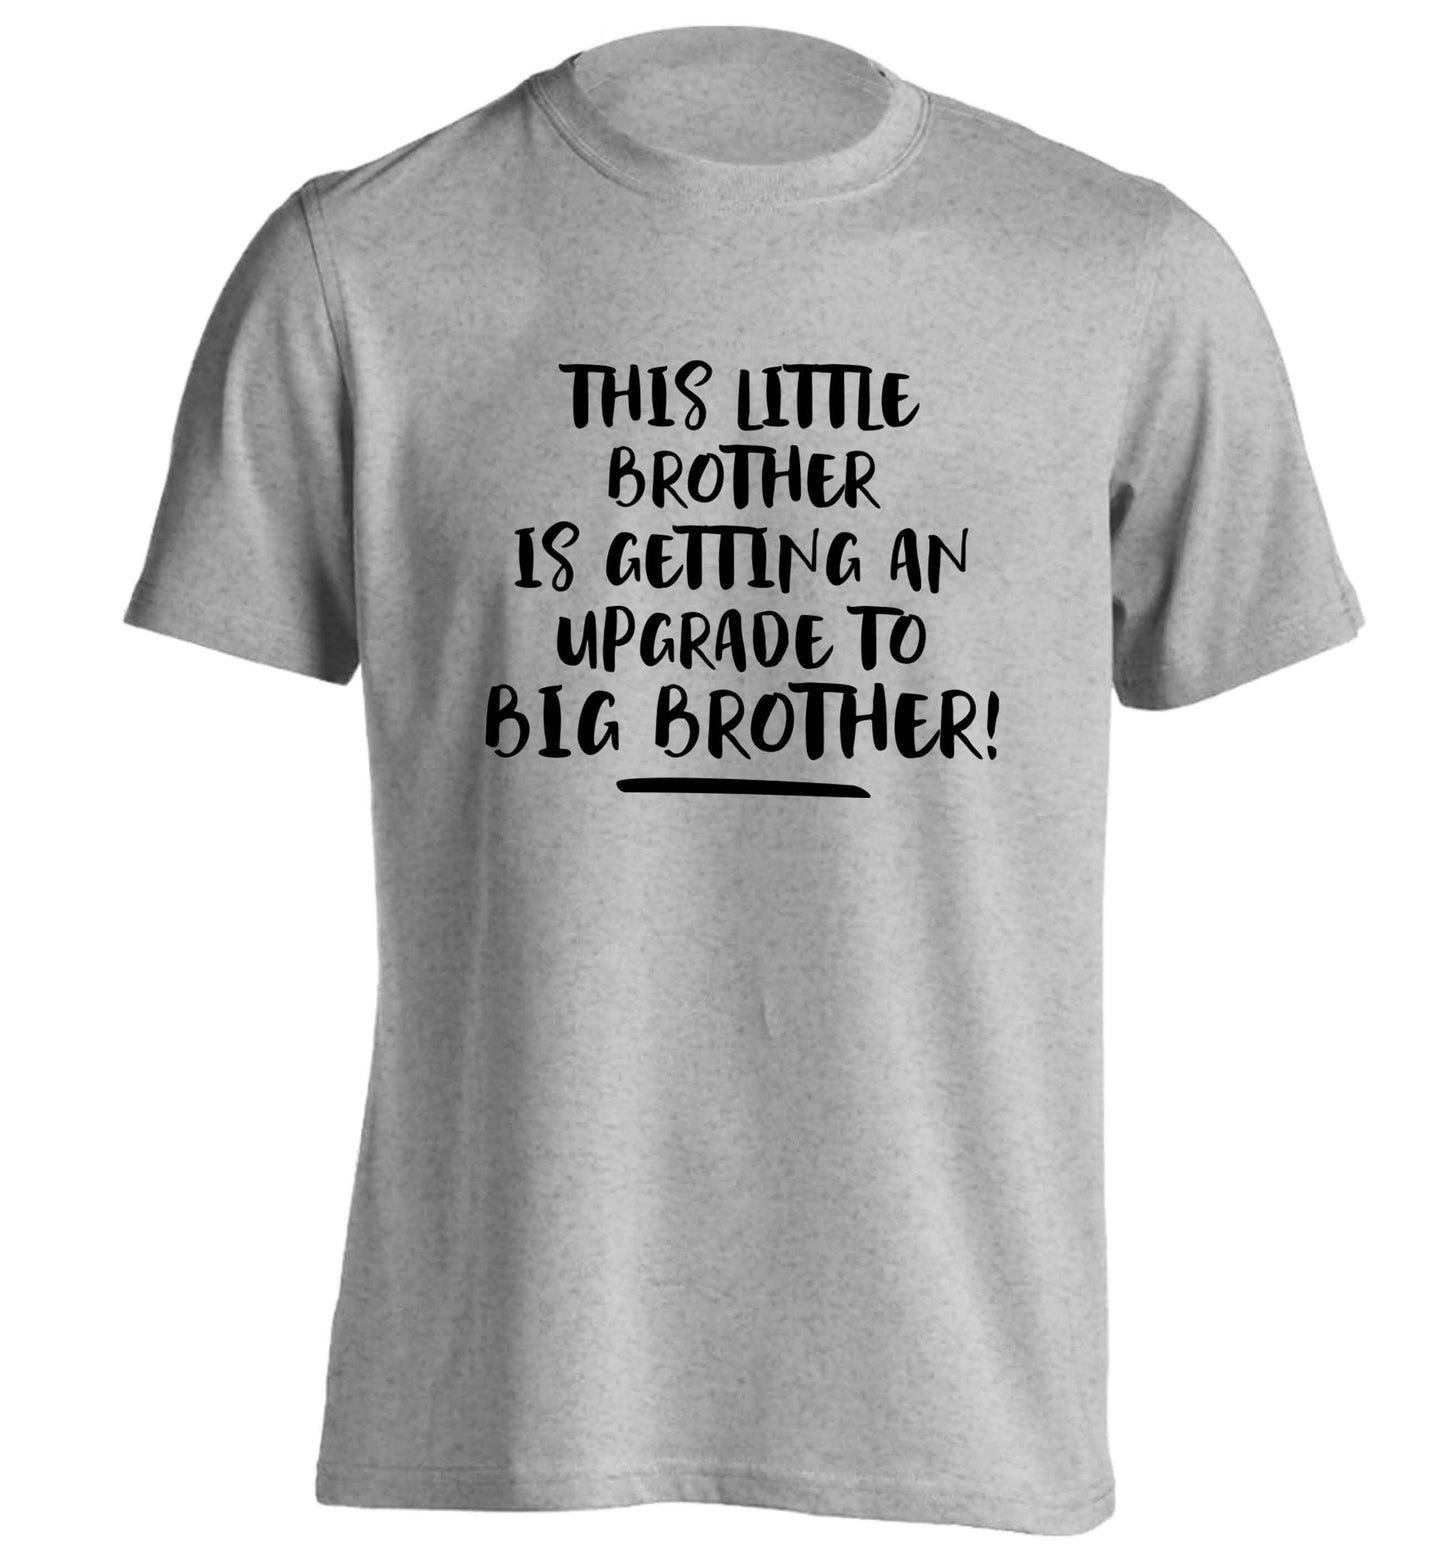 This little brother is getting an upgrade to big brother! adults unisex grey Tshirt 2XL